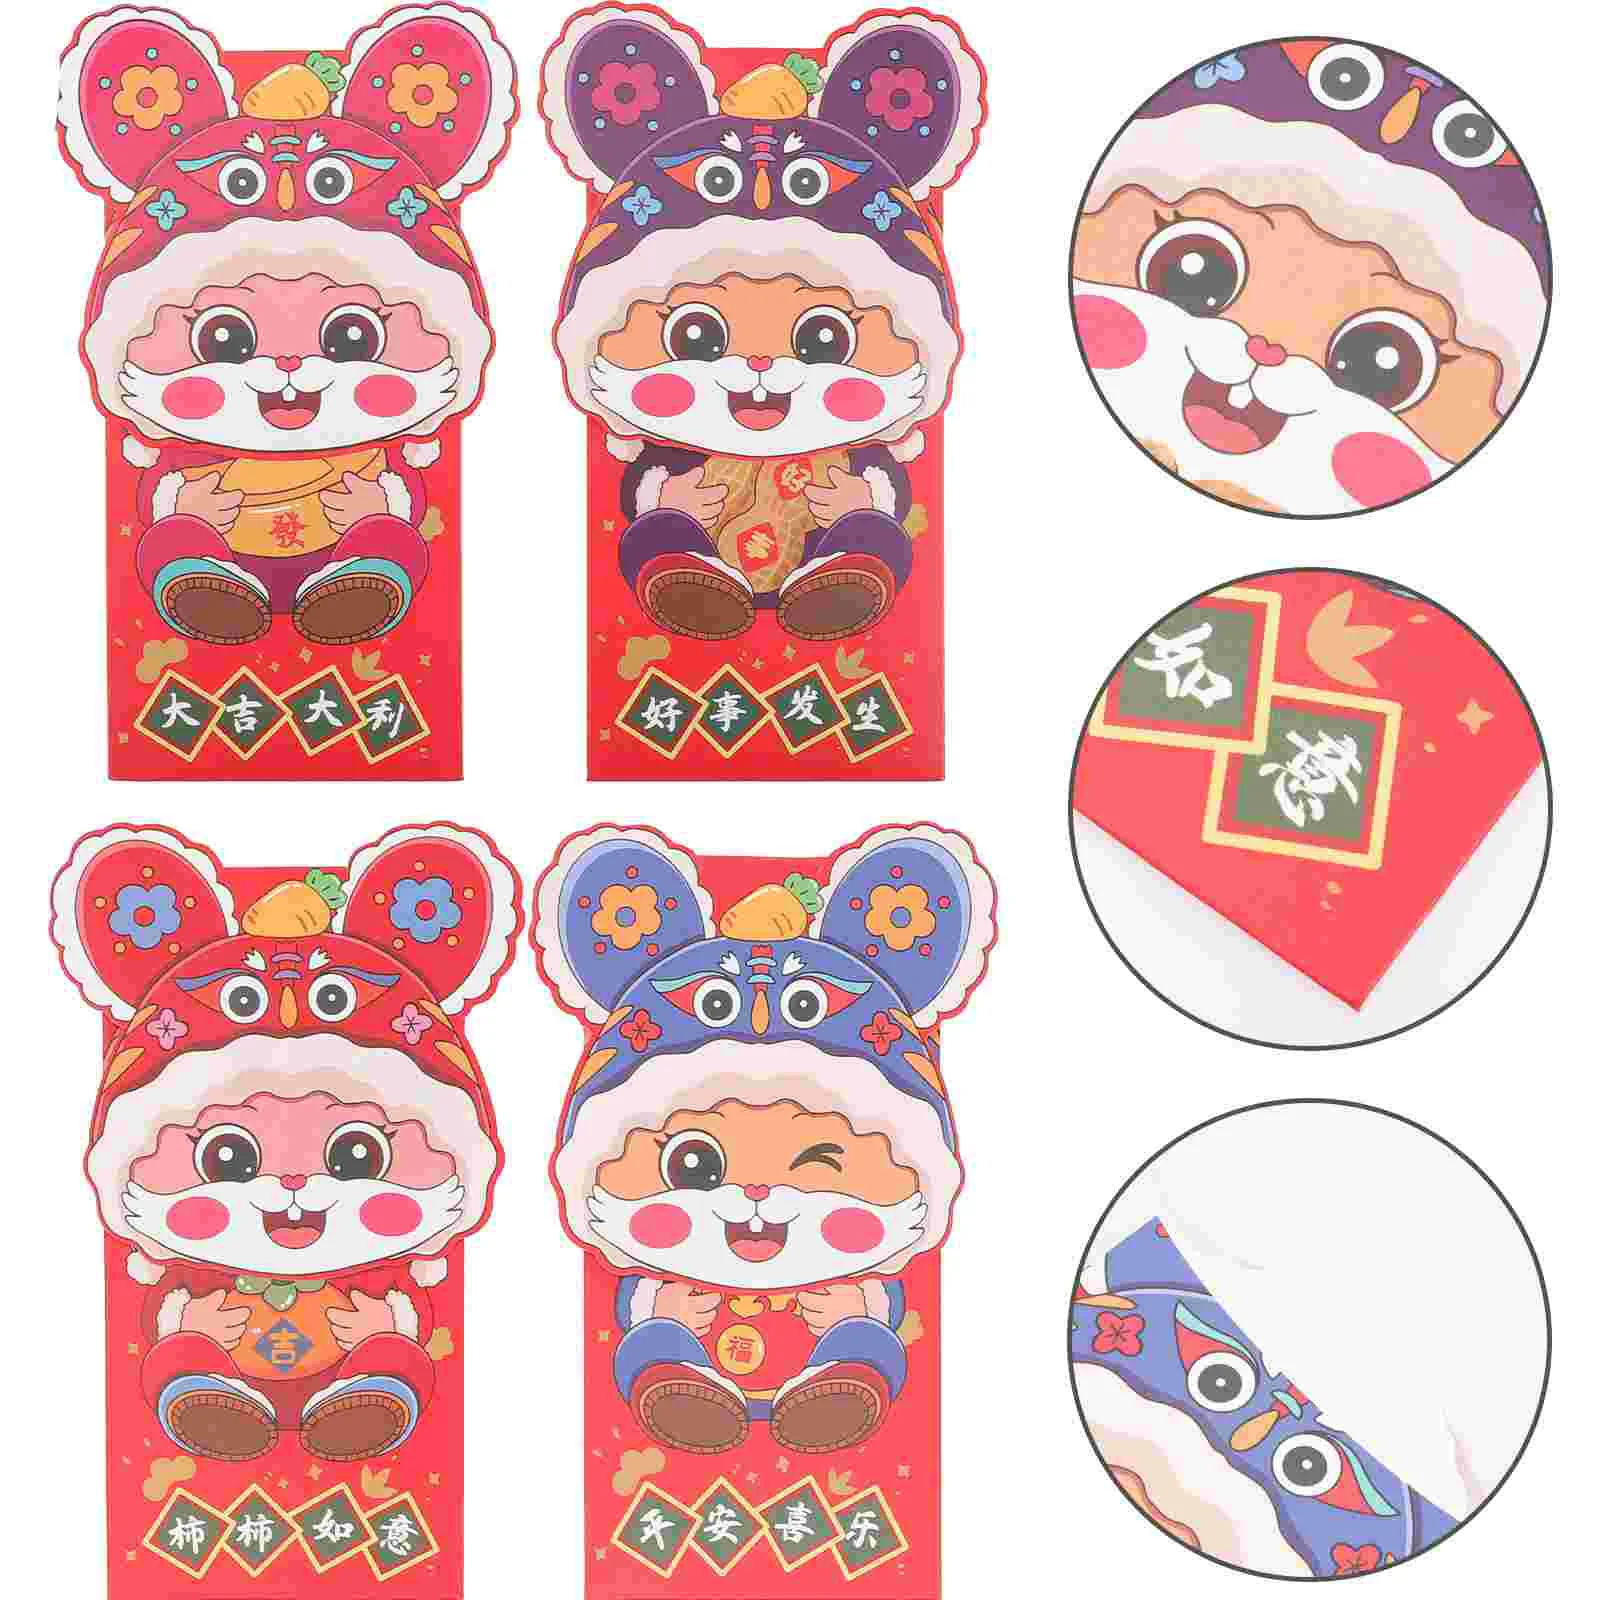 

Year Red New Envelopes Money Envelope Rabbit Chinese Packets Pocket Packet Festival Spring The Lunar Paper Hongbao Luck Lucky